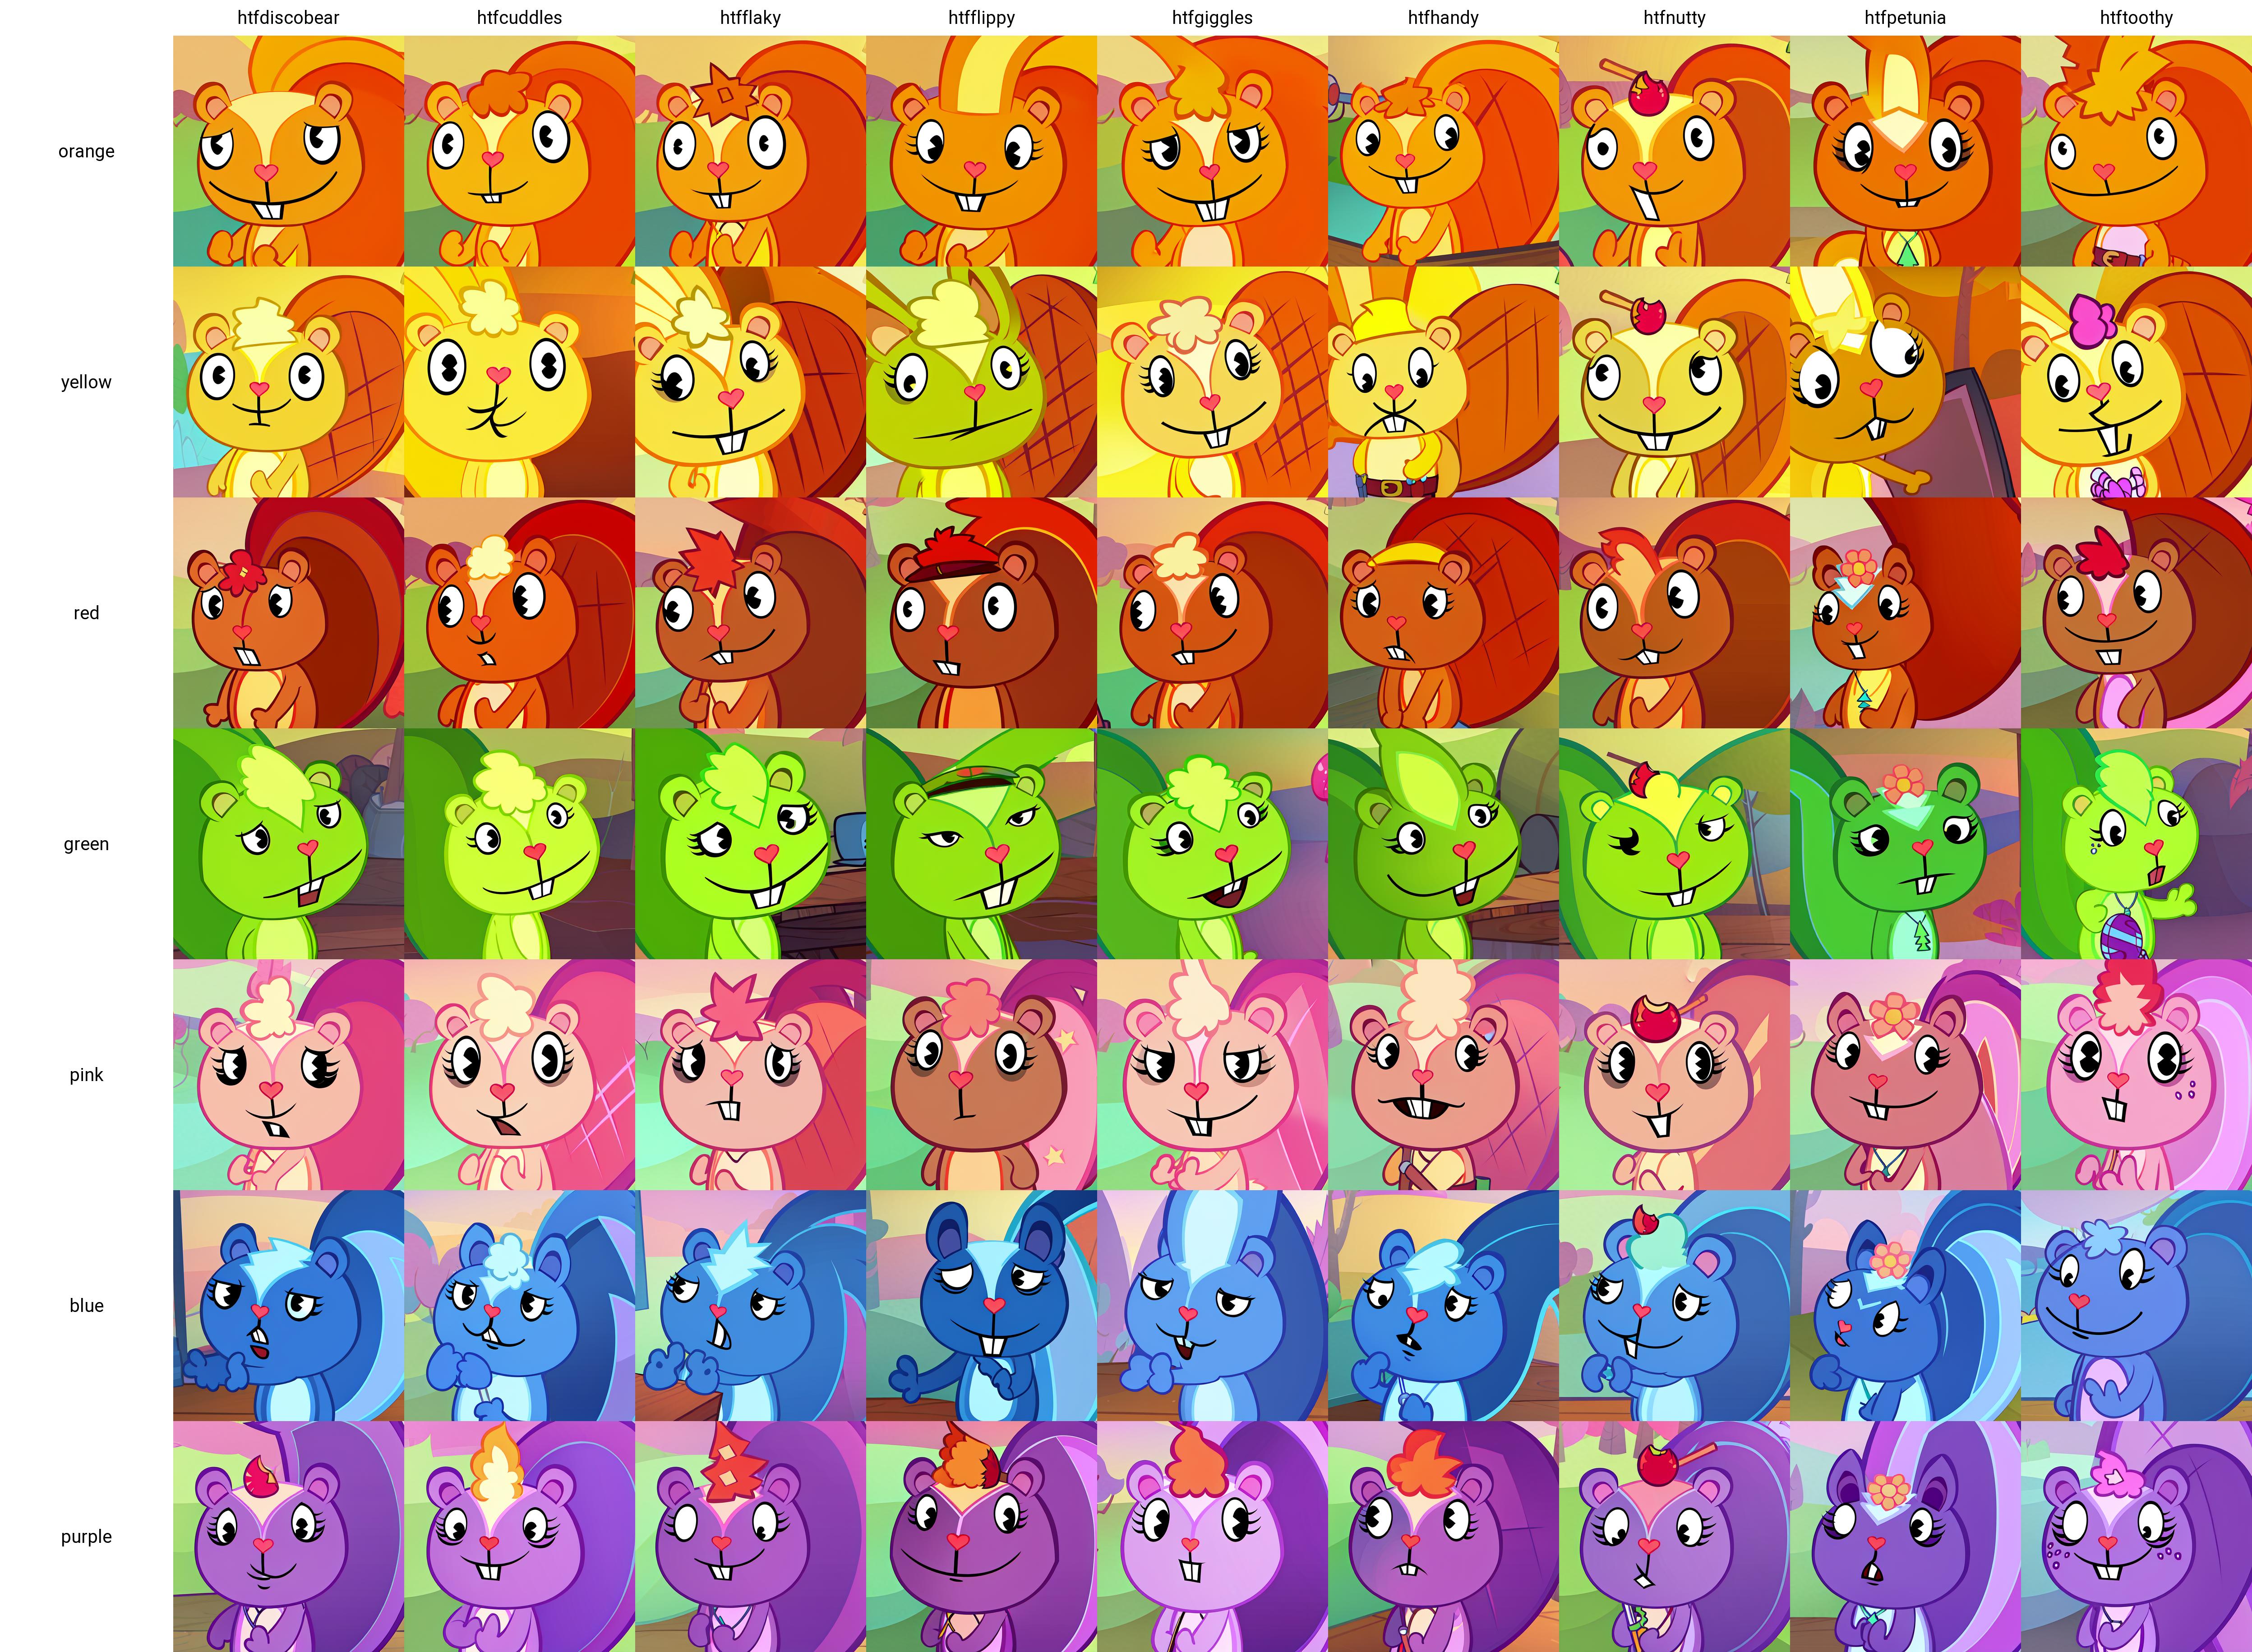 Happy Tree Friends - Multi Characters image by Sylvanal